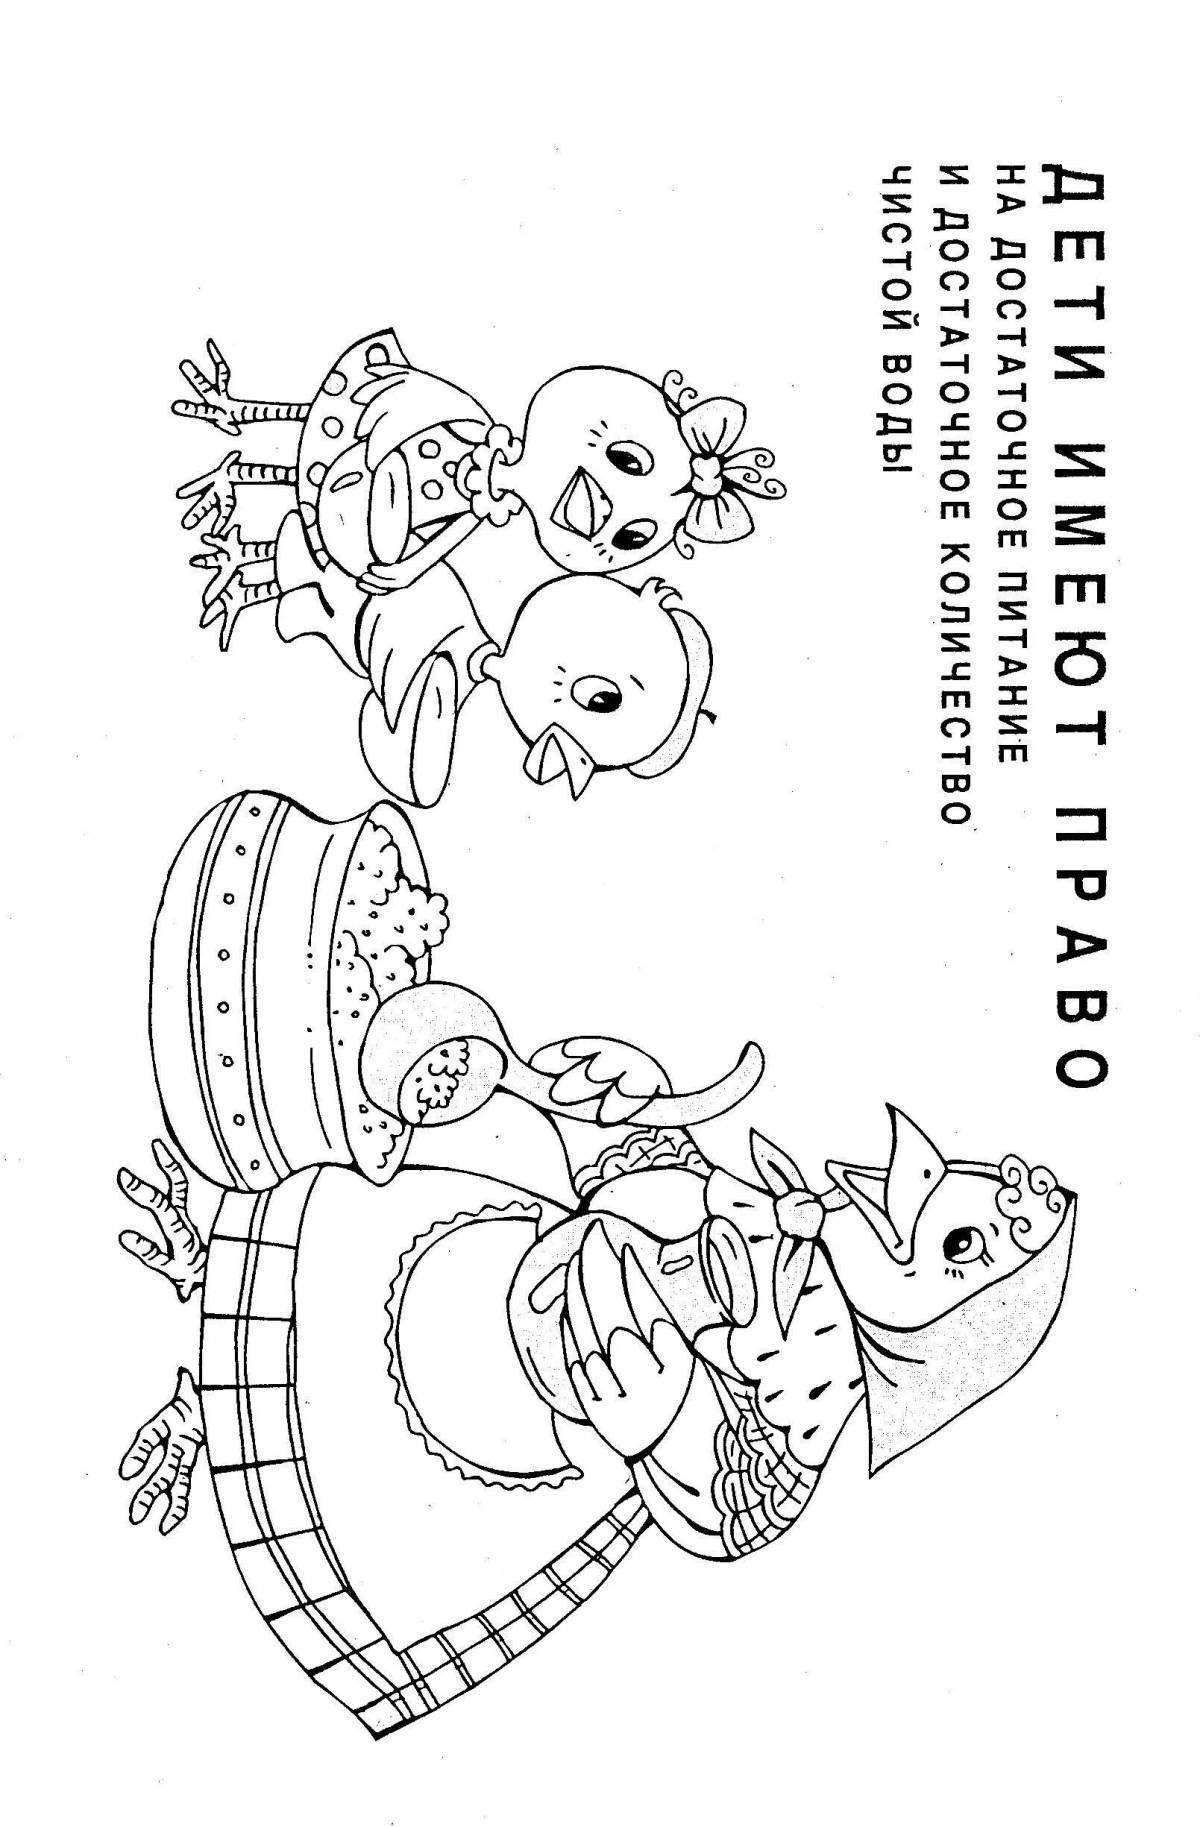 Creative rights and responsibilities of children coloring pages